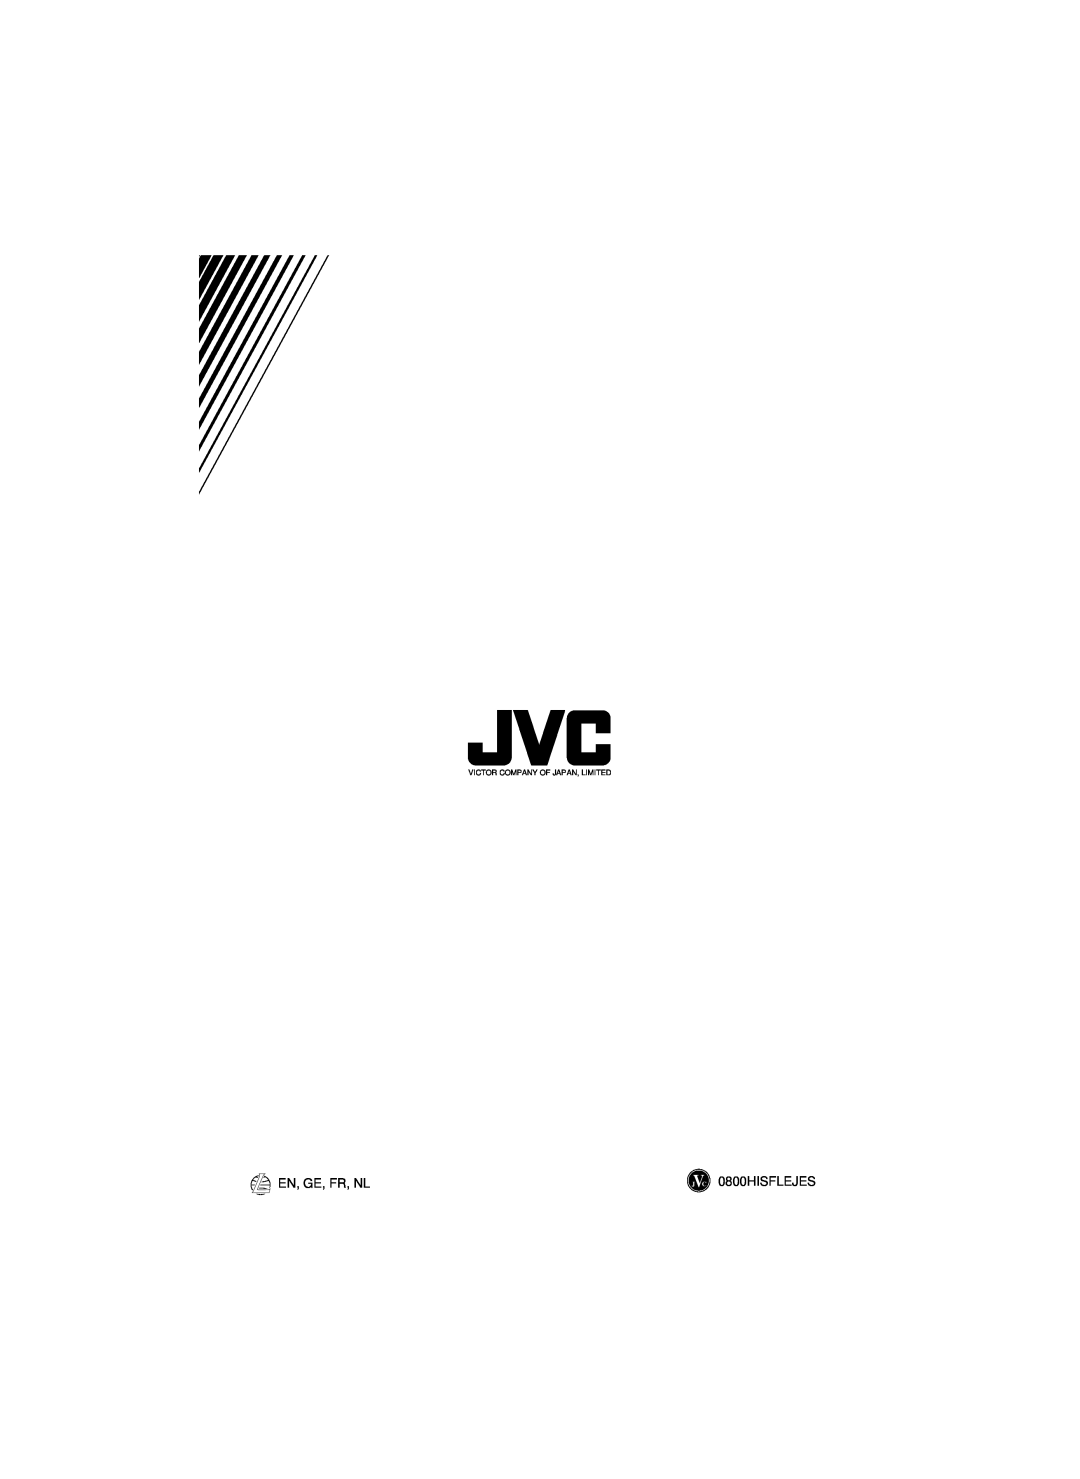 JVC KS-FX460R, KS-FX463R manual En, Ge, Fr, Nl, J C 0800HISFLEJES, Victor Company Of Japan, Limited 